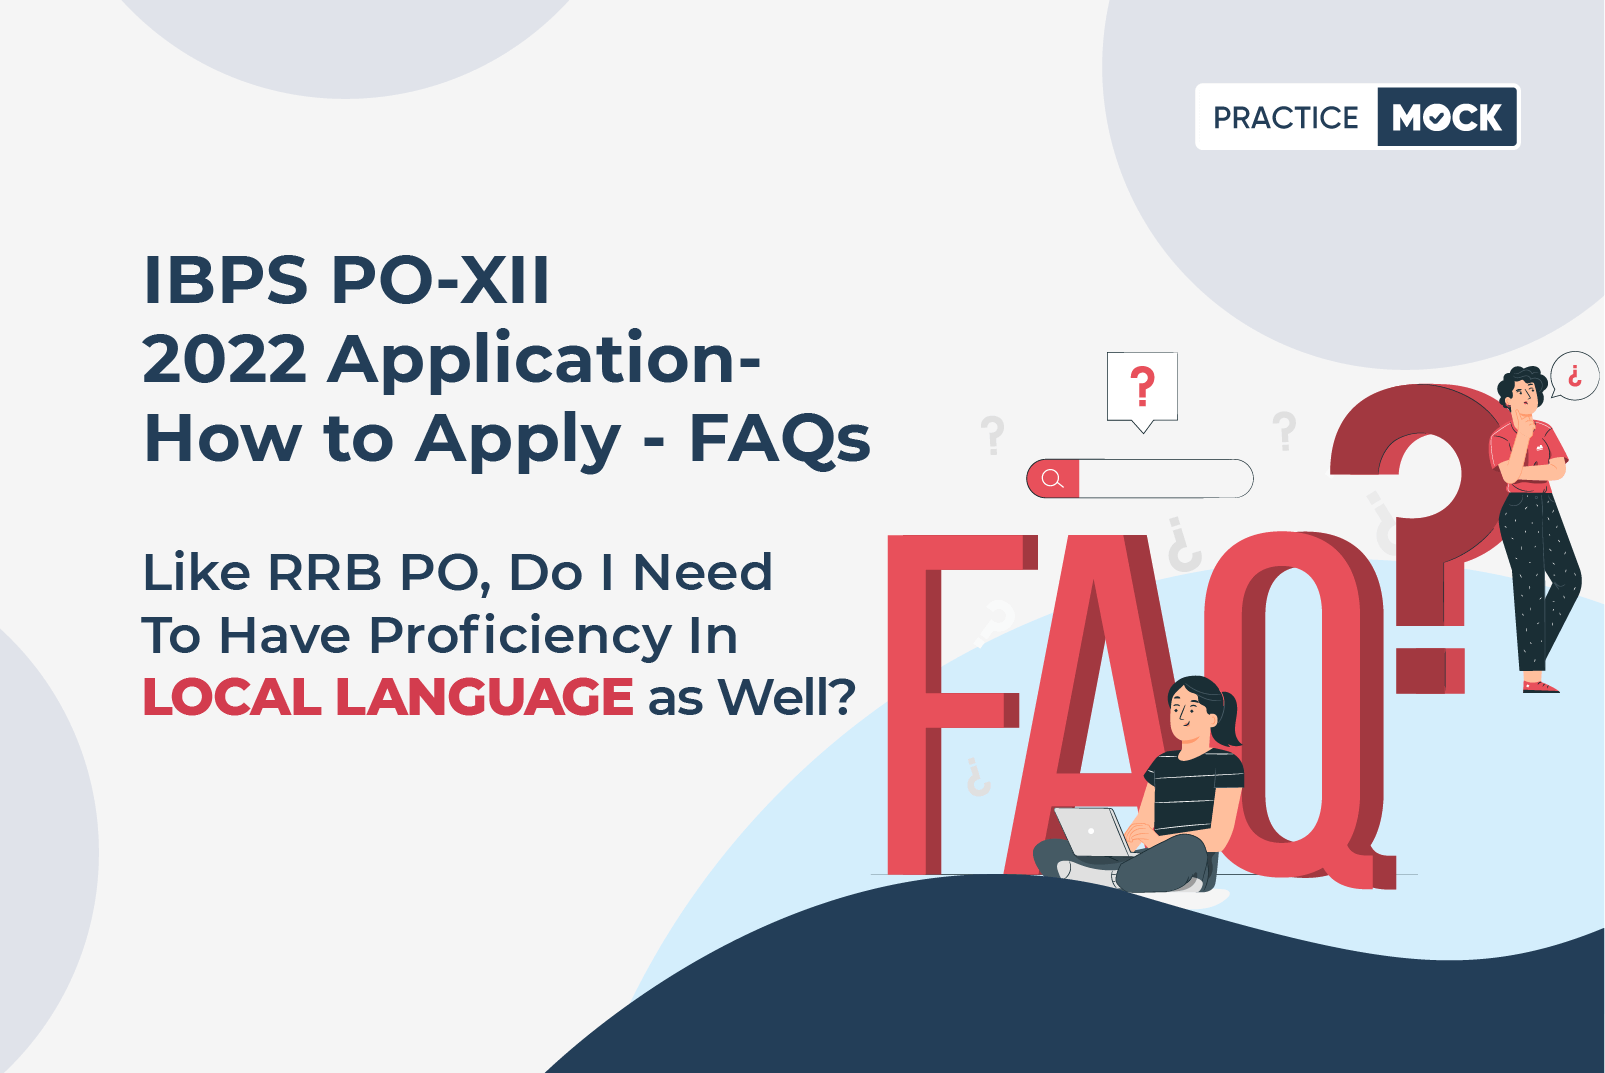 IBPS PO-XII 2022 Application- How to Apply- FAQs